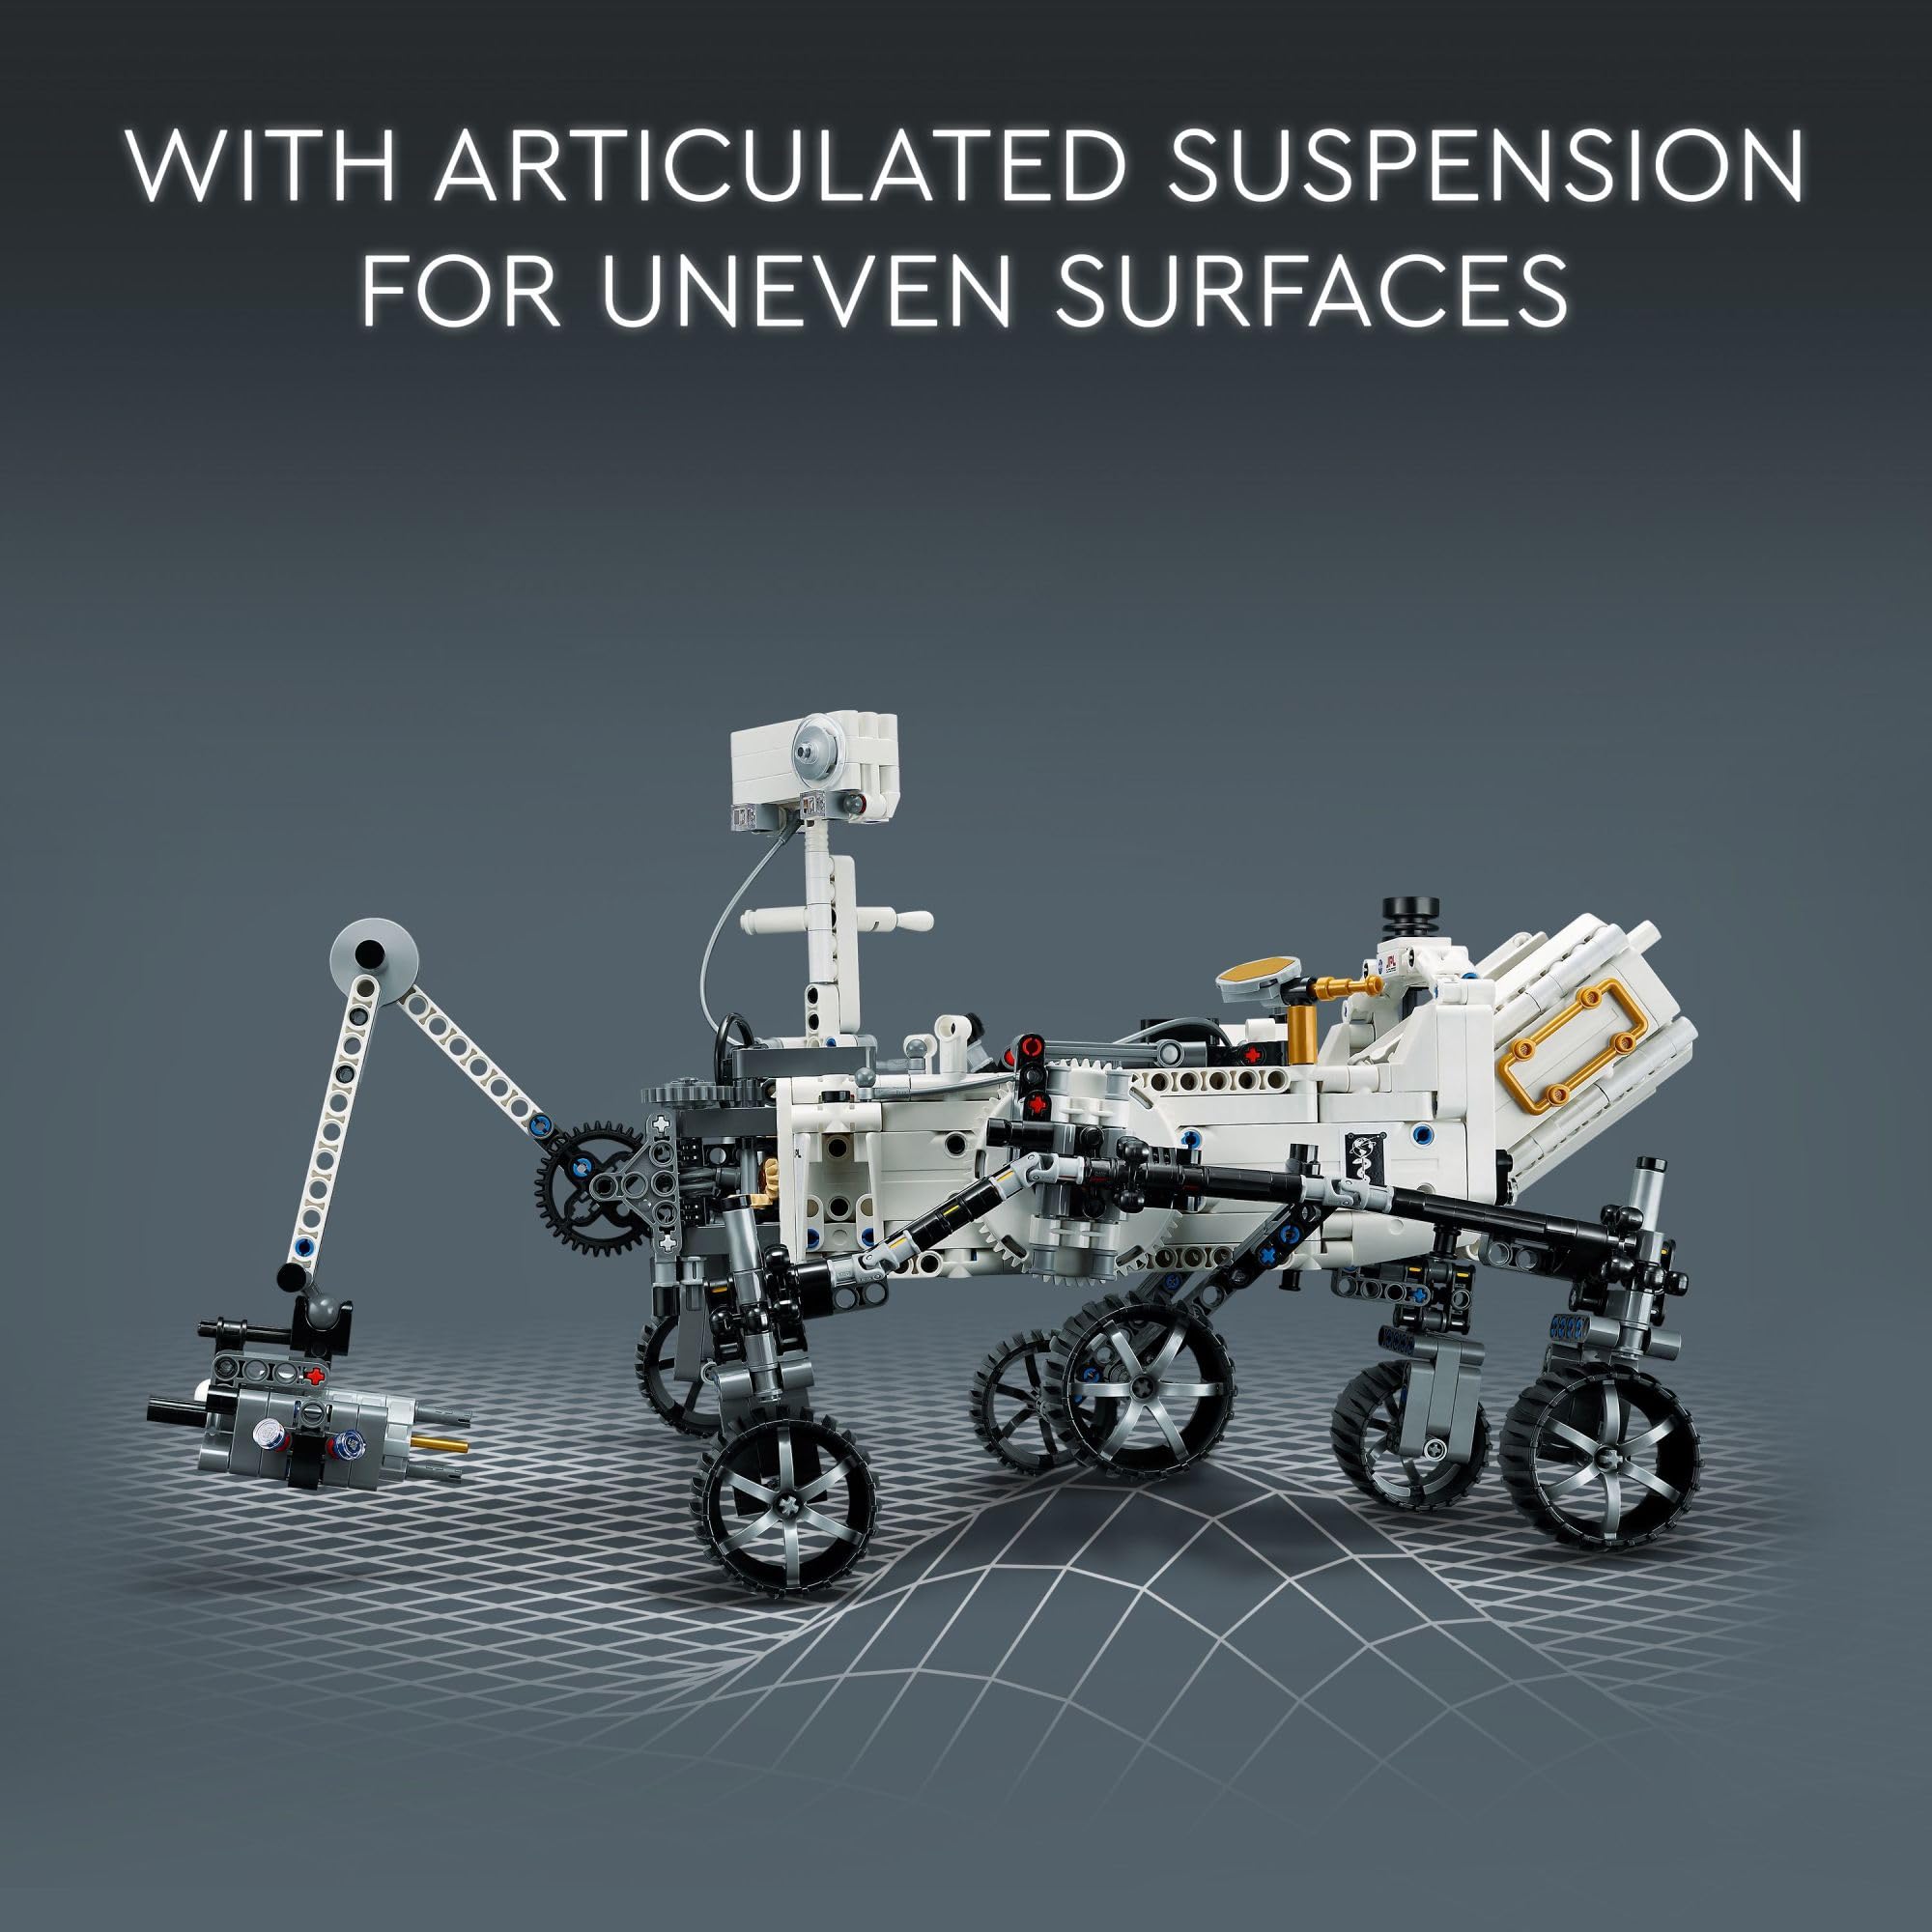 LEGO Technic NASA Mars Rover Perseverance 42158 Advanced Building Kit for Kids Ages 10 and Up, NASA Toy with Replica Ingenuity Helicopter, Great Gift for Kids Who Love Engineering and Science Projects